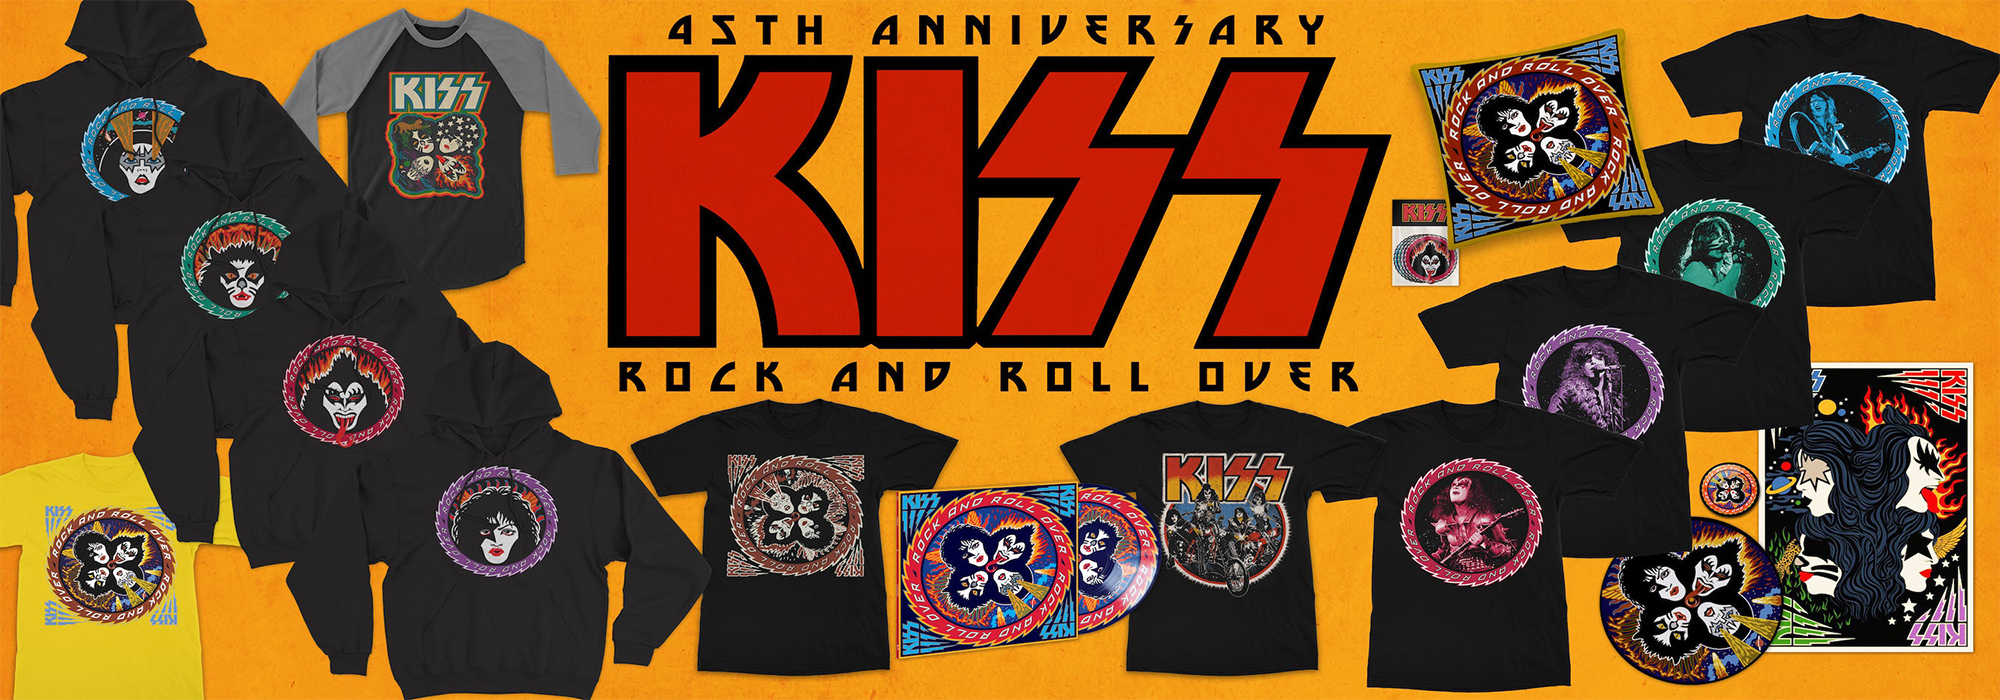 Kiss Deluxe Box Set Rock and Roll Over – Replay Toys LLC